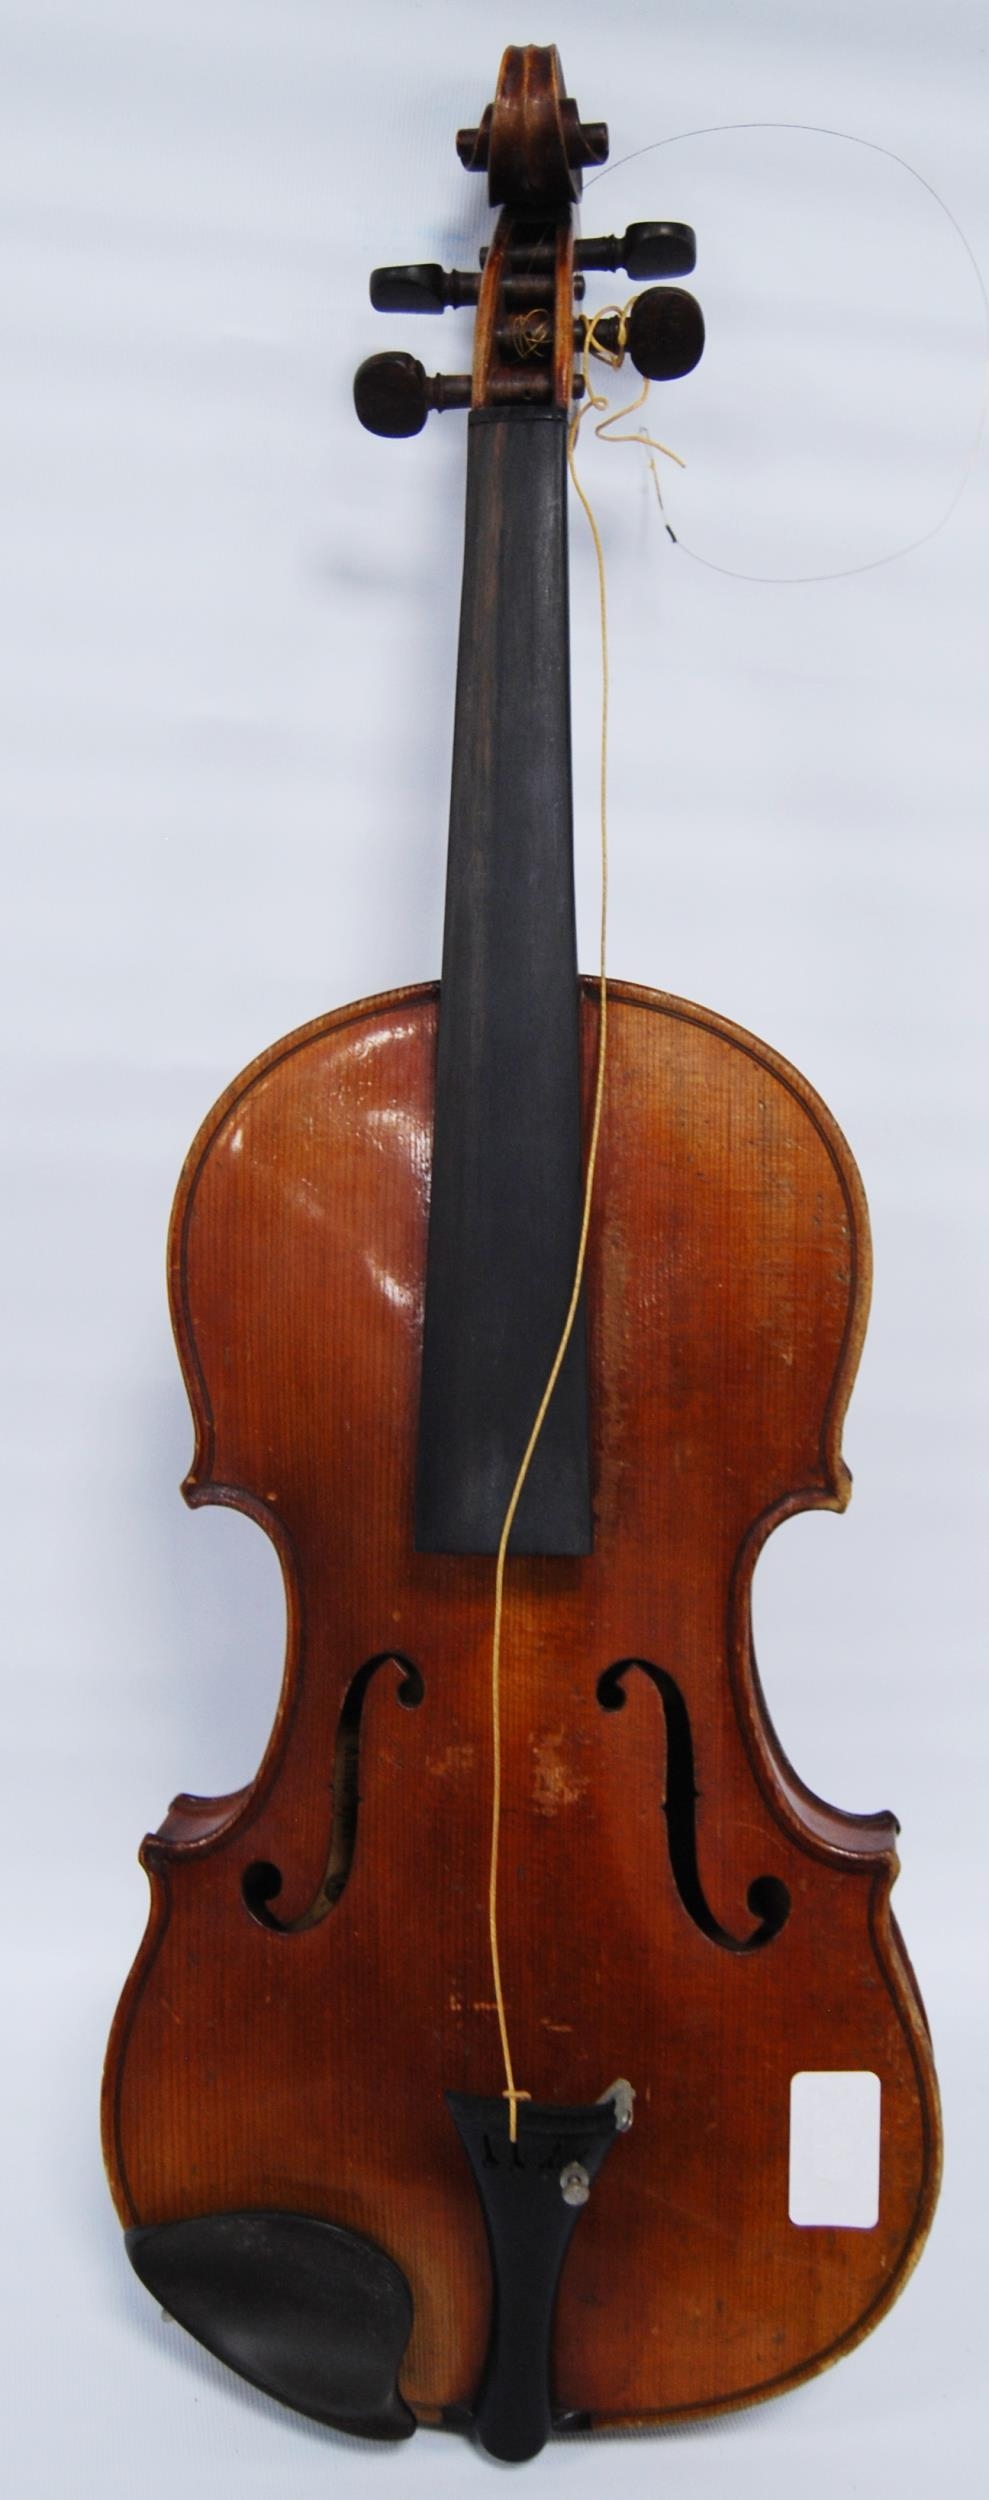 Antique violin with single-piece back and copy Antonio Stradivarius label, dated 1721, 35cm long, - Image 2 of 14